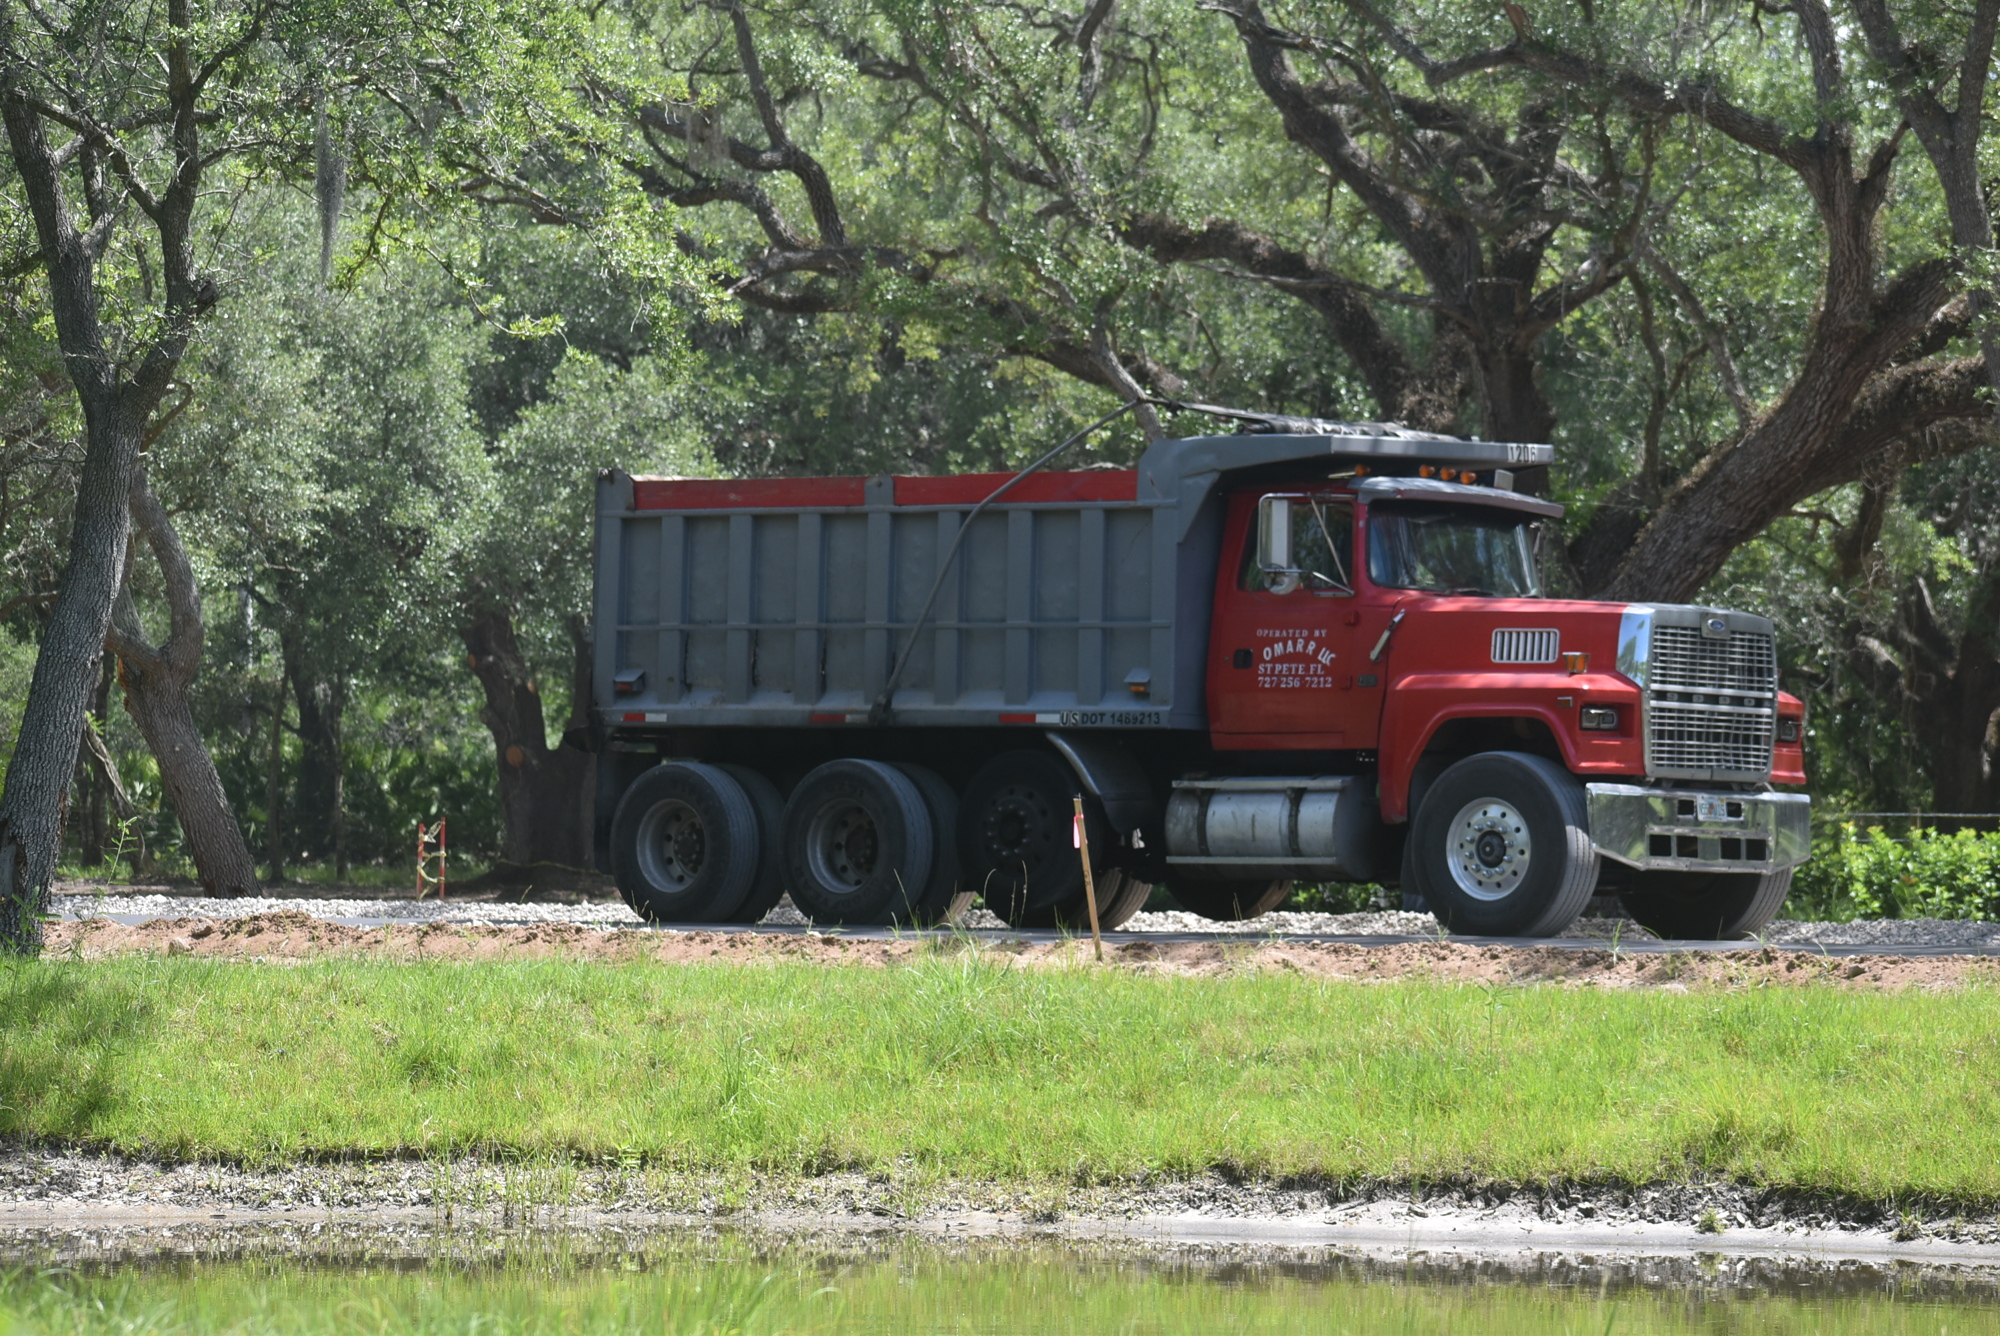 A dump truck leaves the Mallaranny property on April 29. Russell Ireland, who lives next door, said trucks continue to bring dirt into the property even though the property's manager said he would stop in March.